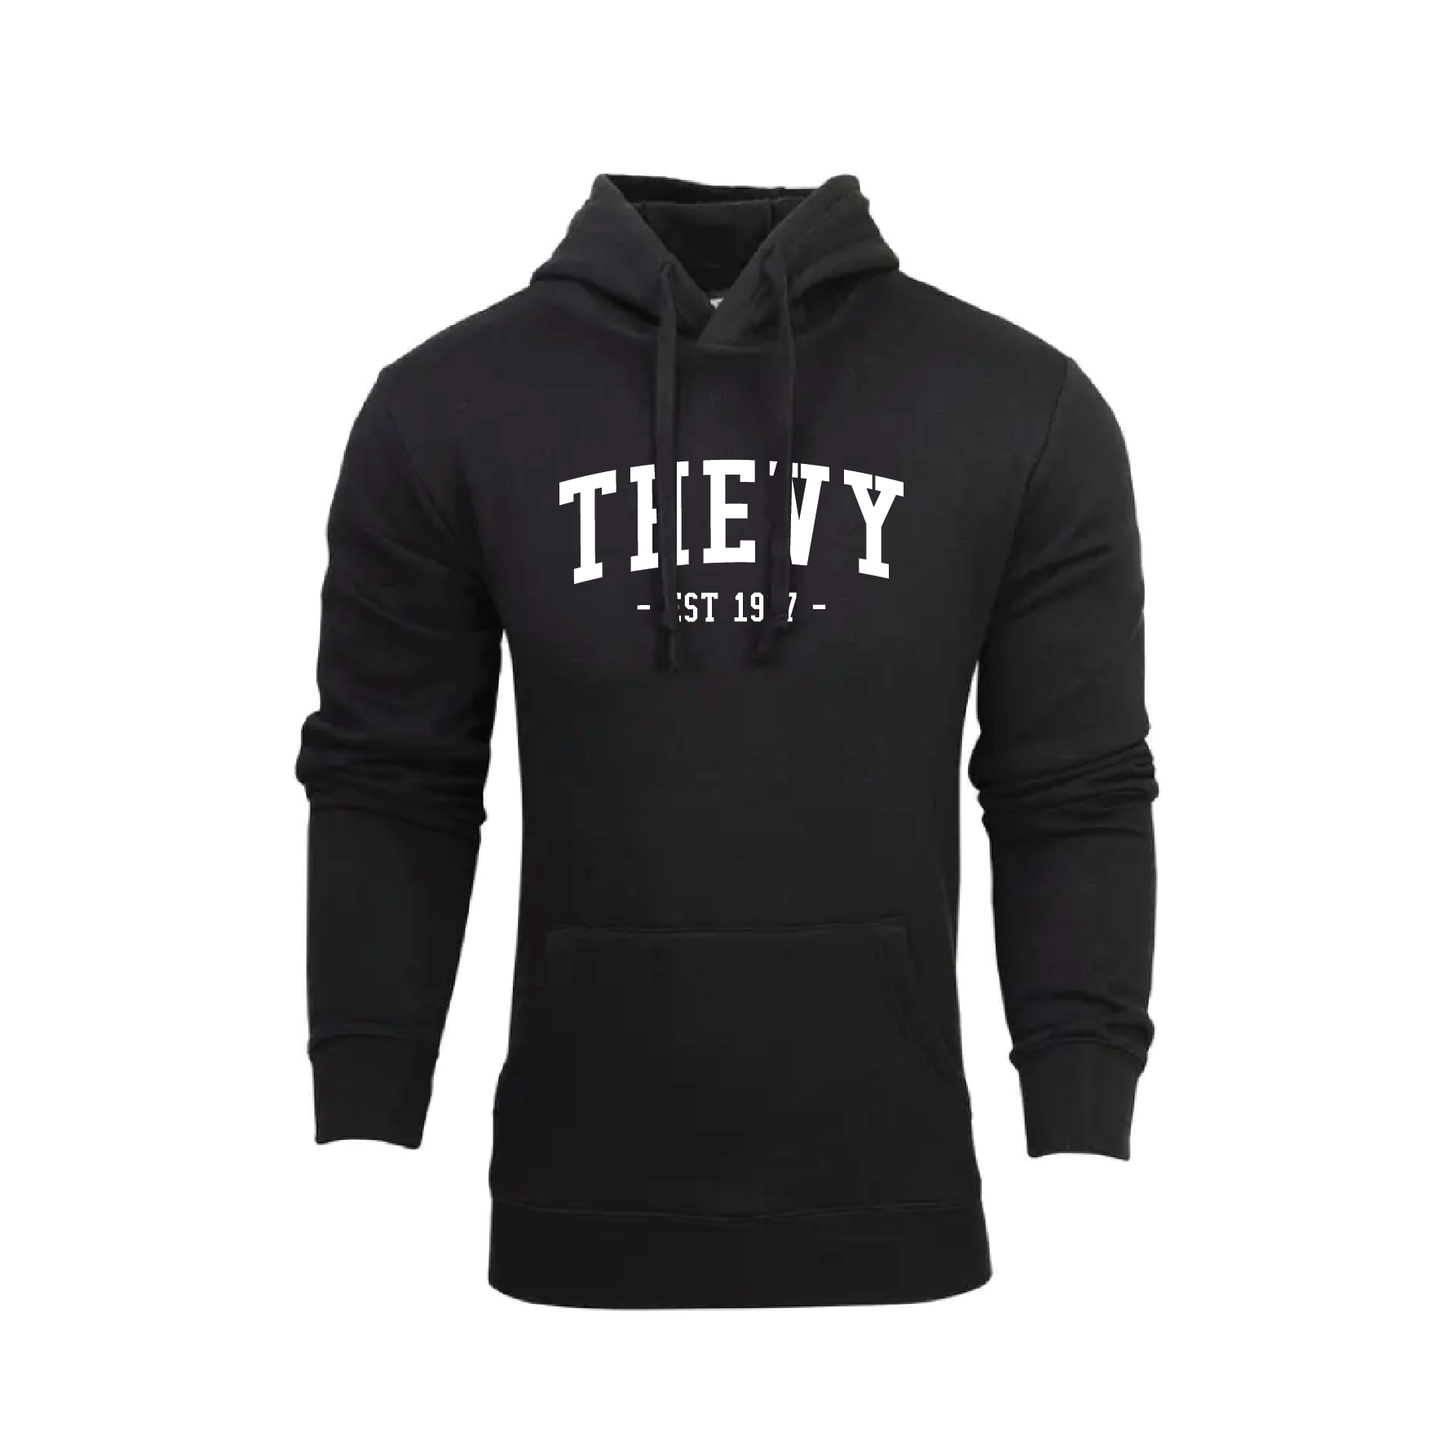 THEVENARD SPORTS CLUB HOODED SWEAT - THEVY FRONT LOGO (AP230295)